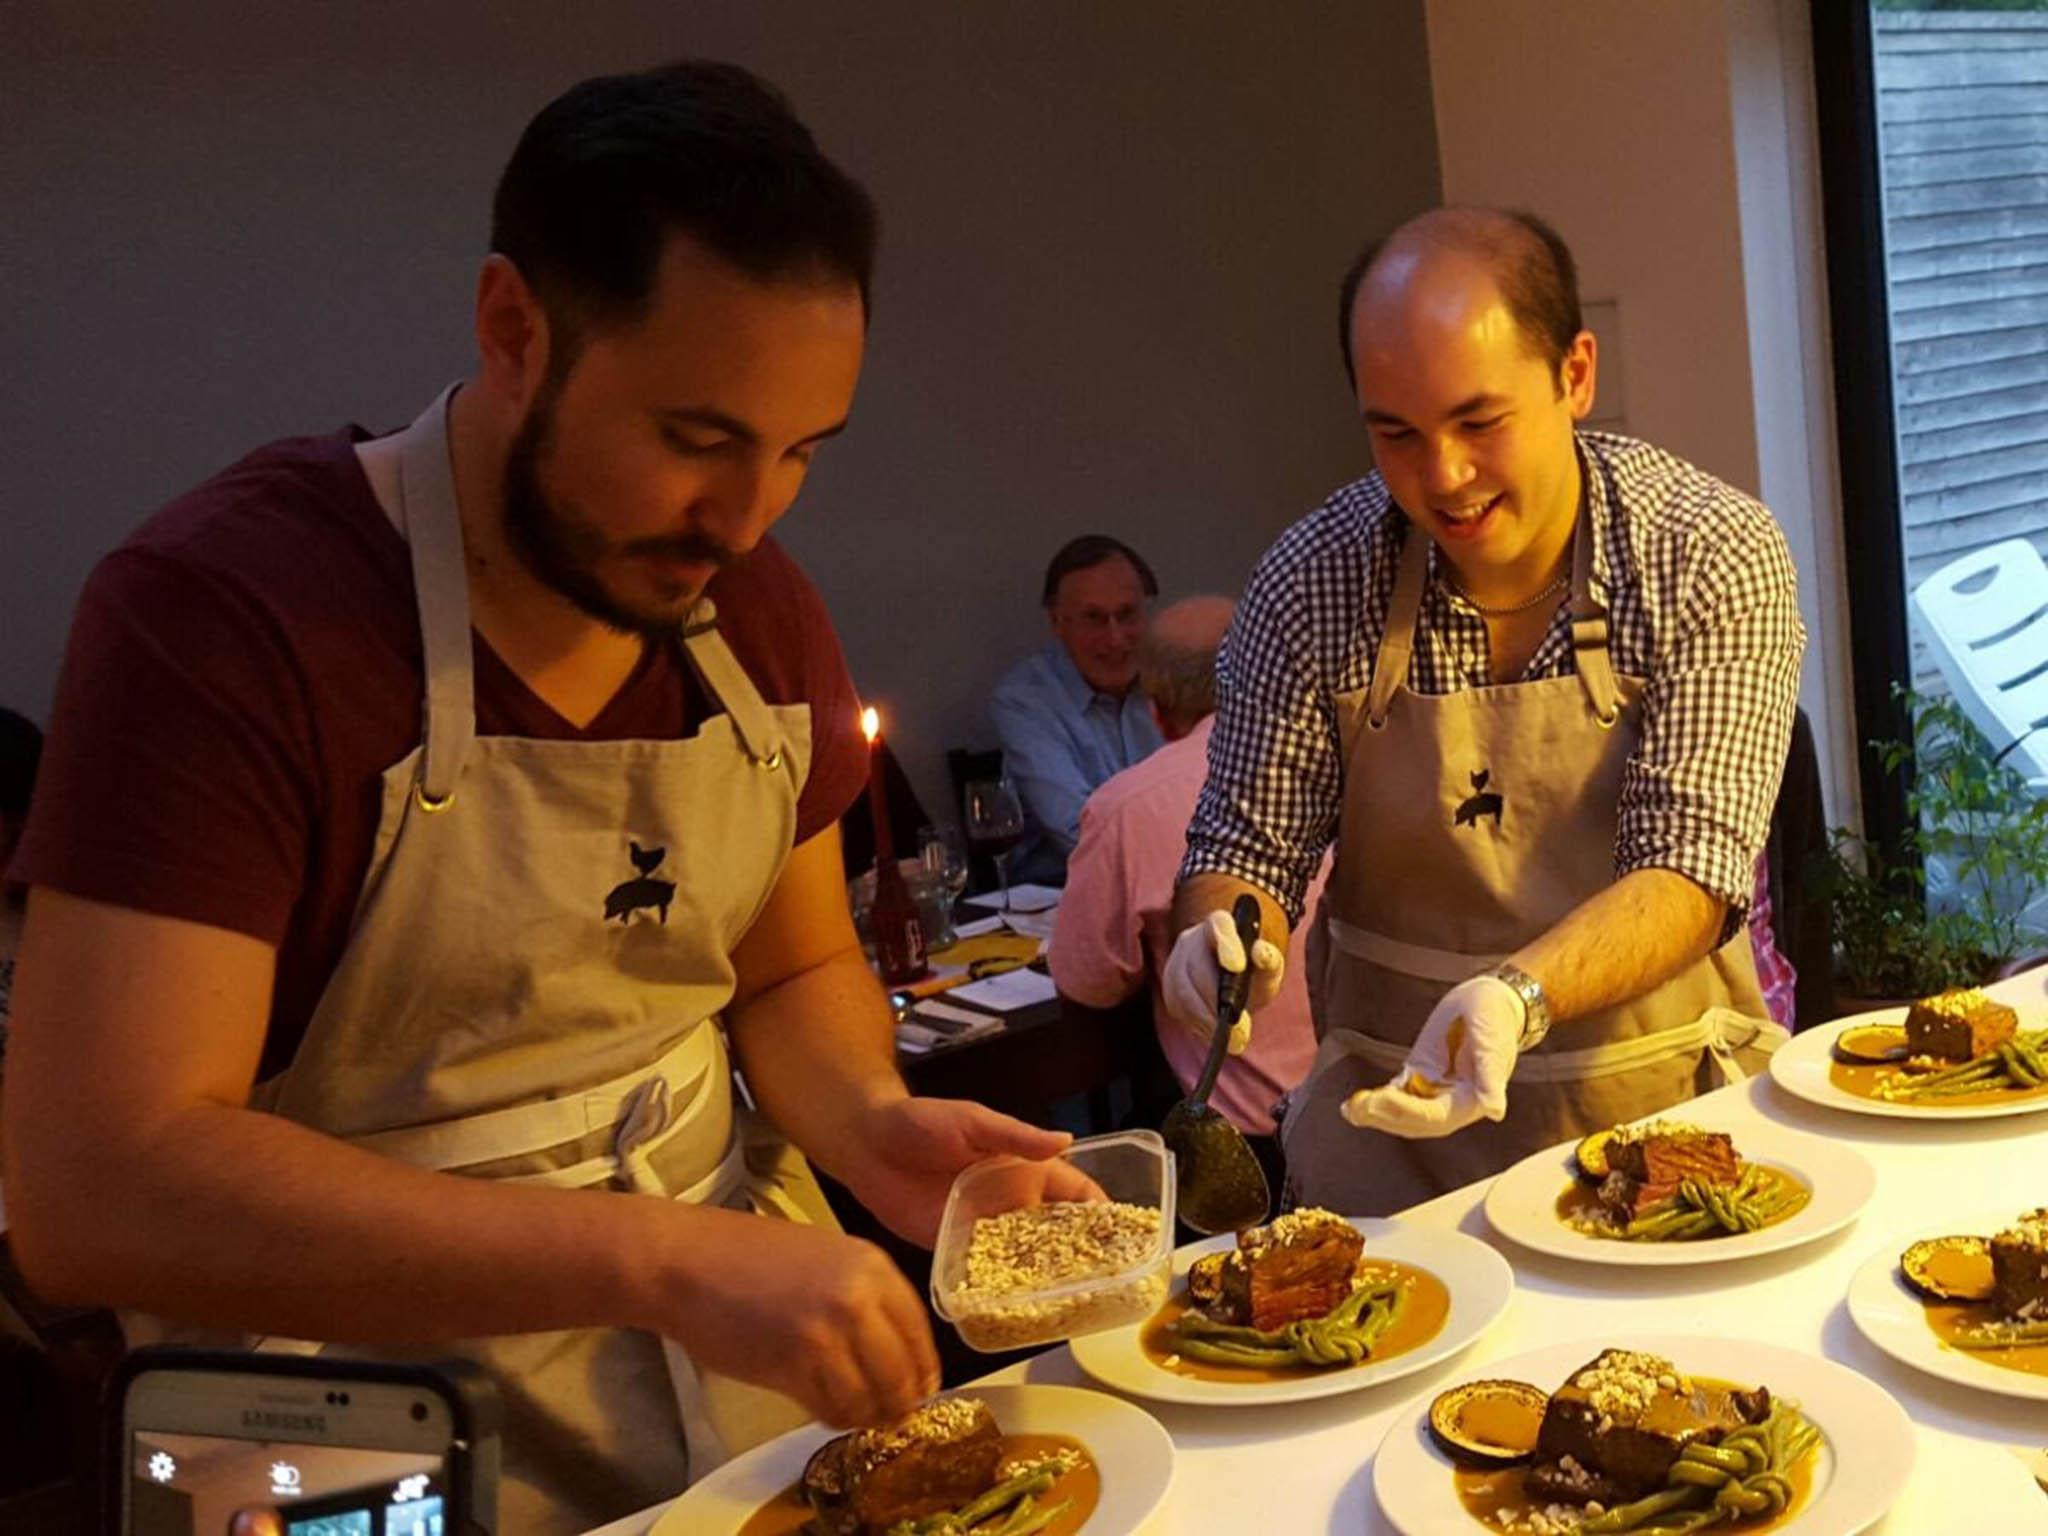 Brothers Mike (left) and Mark Corbyn serve up their mother's recipes at their supper club